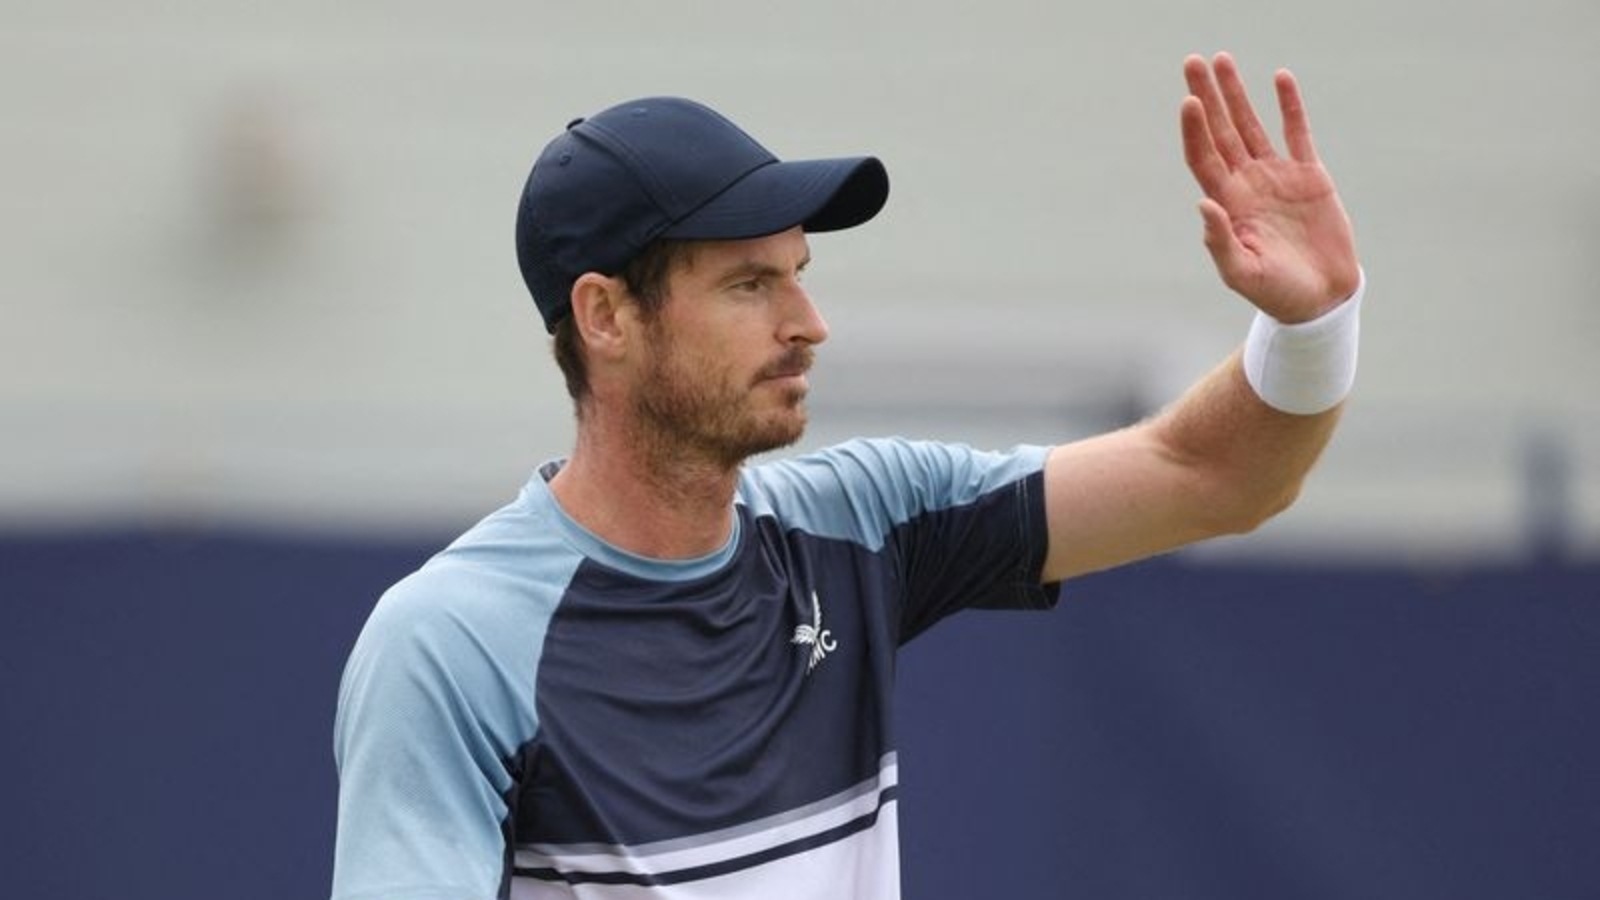 Injured Murray withdraws from Queen’s Club Championships